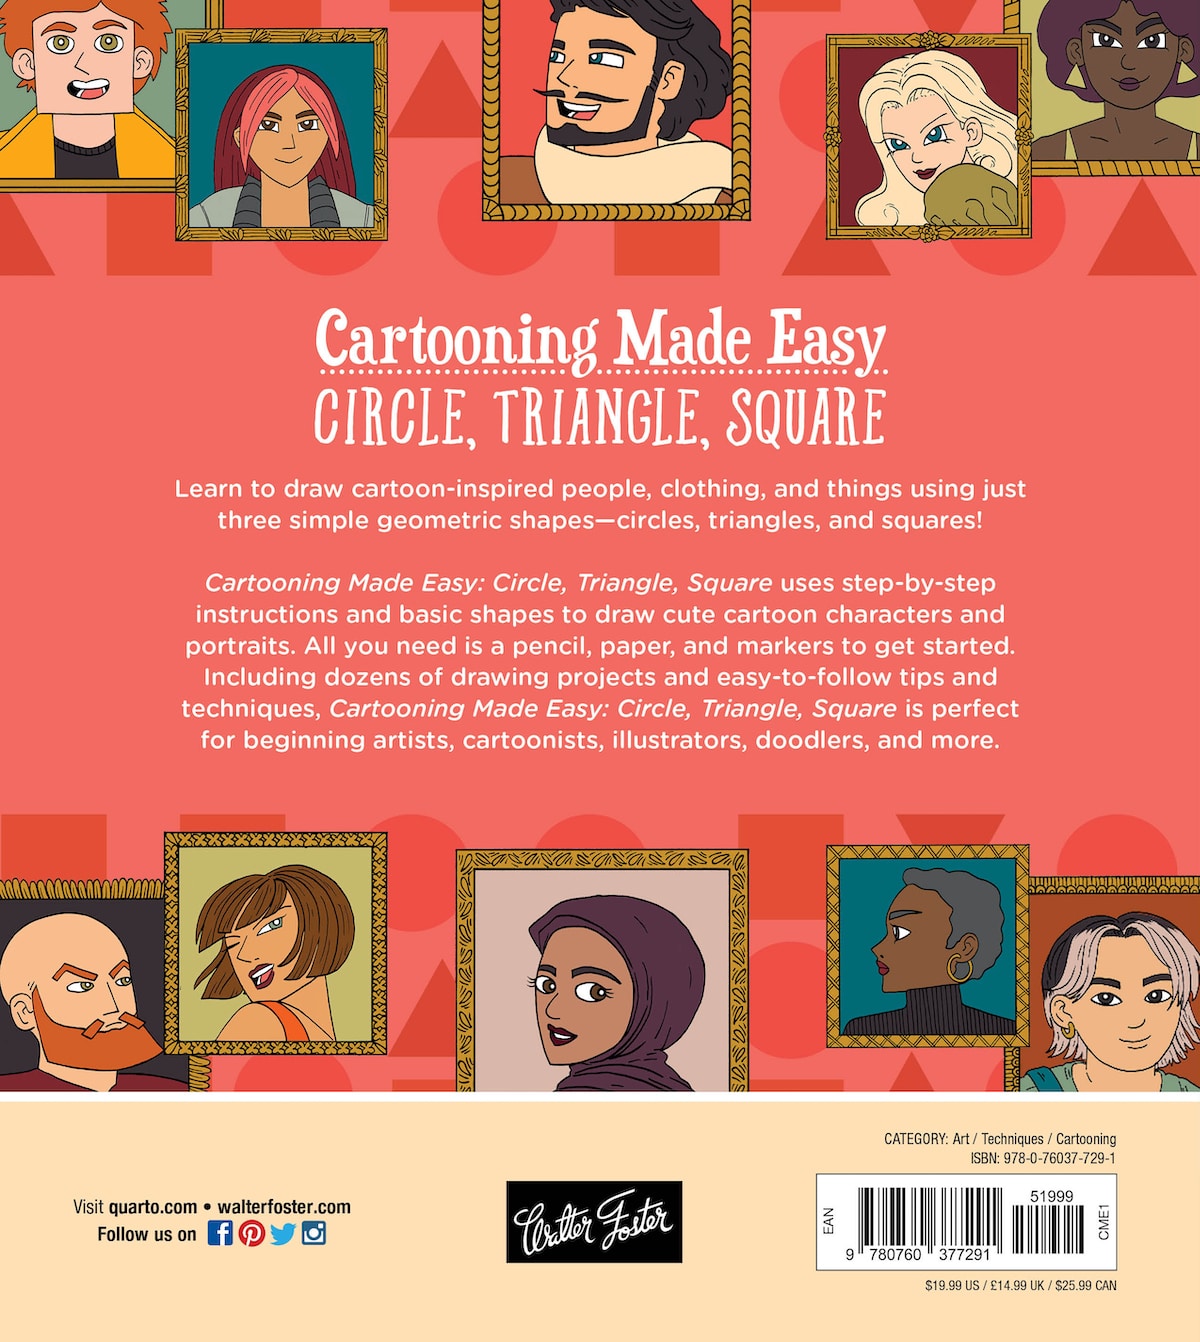 Learn To Draw Cartoons And Keep It Simple - Toons Mag